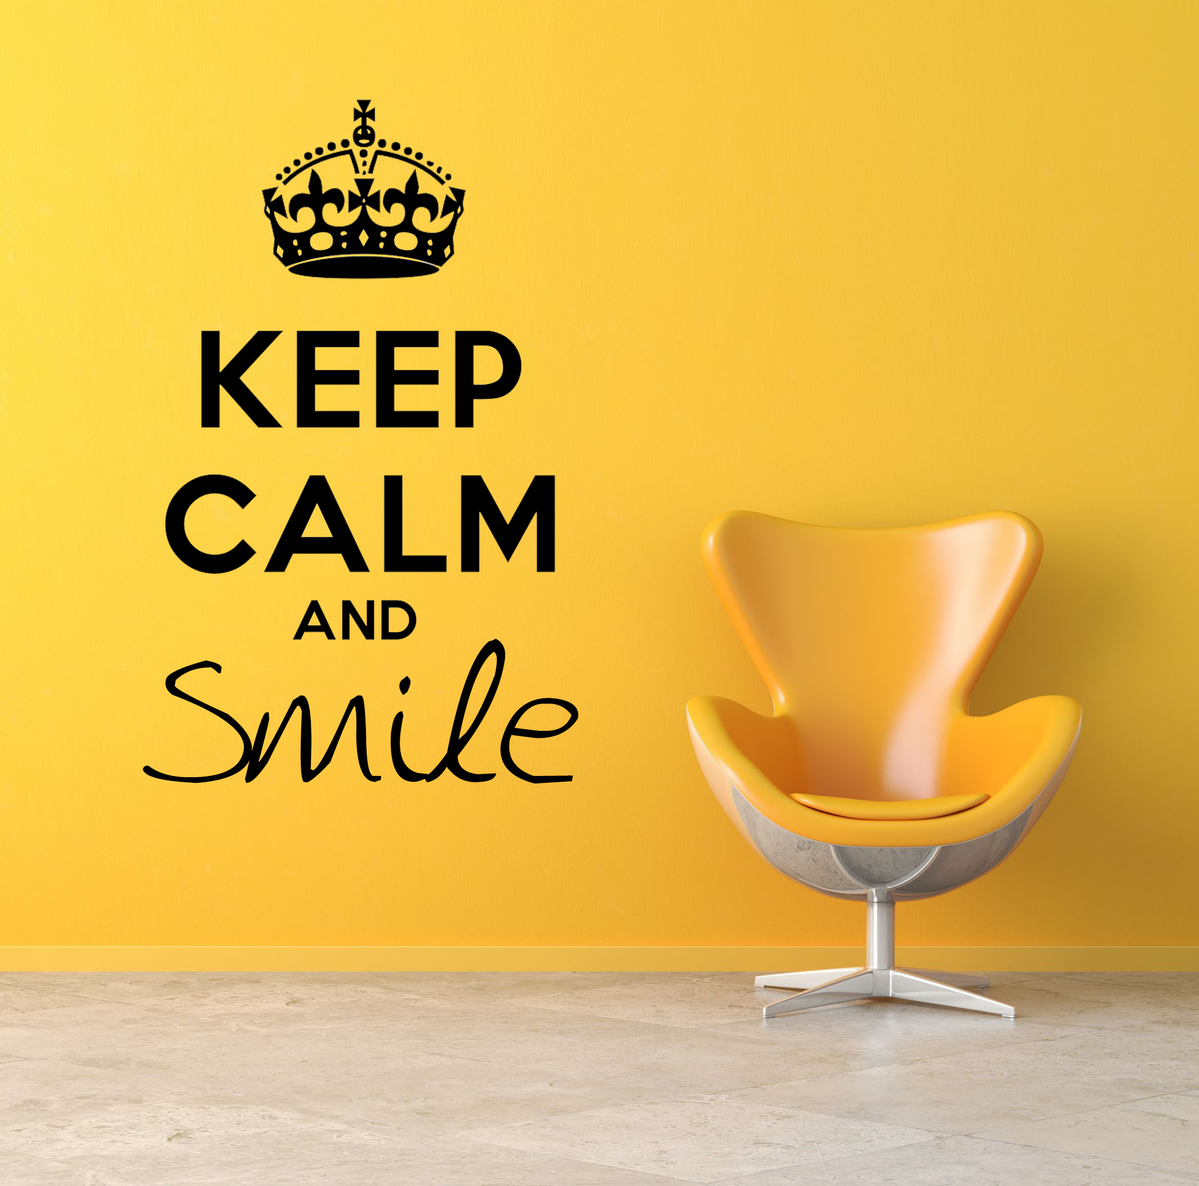 Gain Independent Quotes: #2 Keep Calm And Smile.